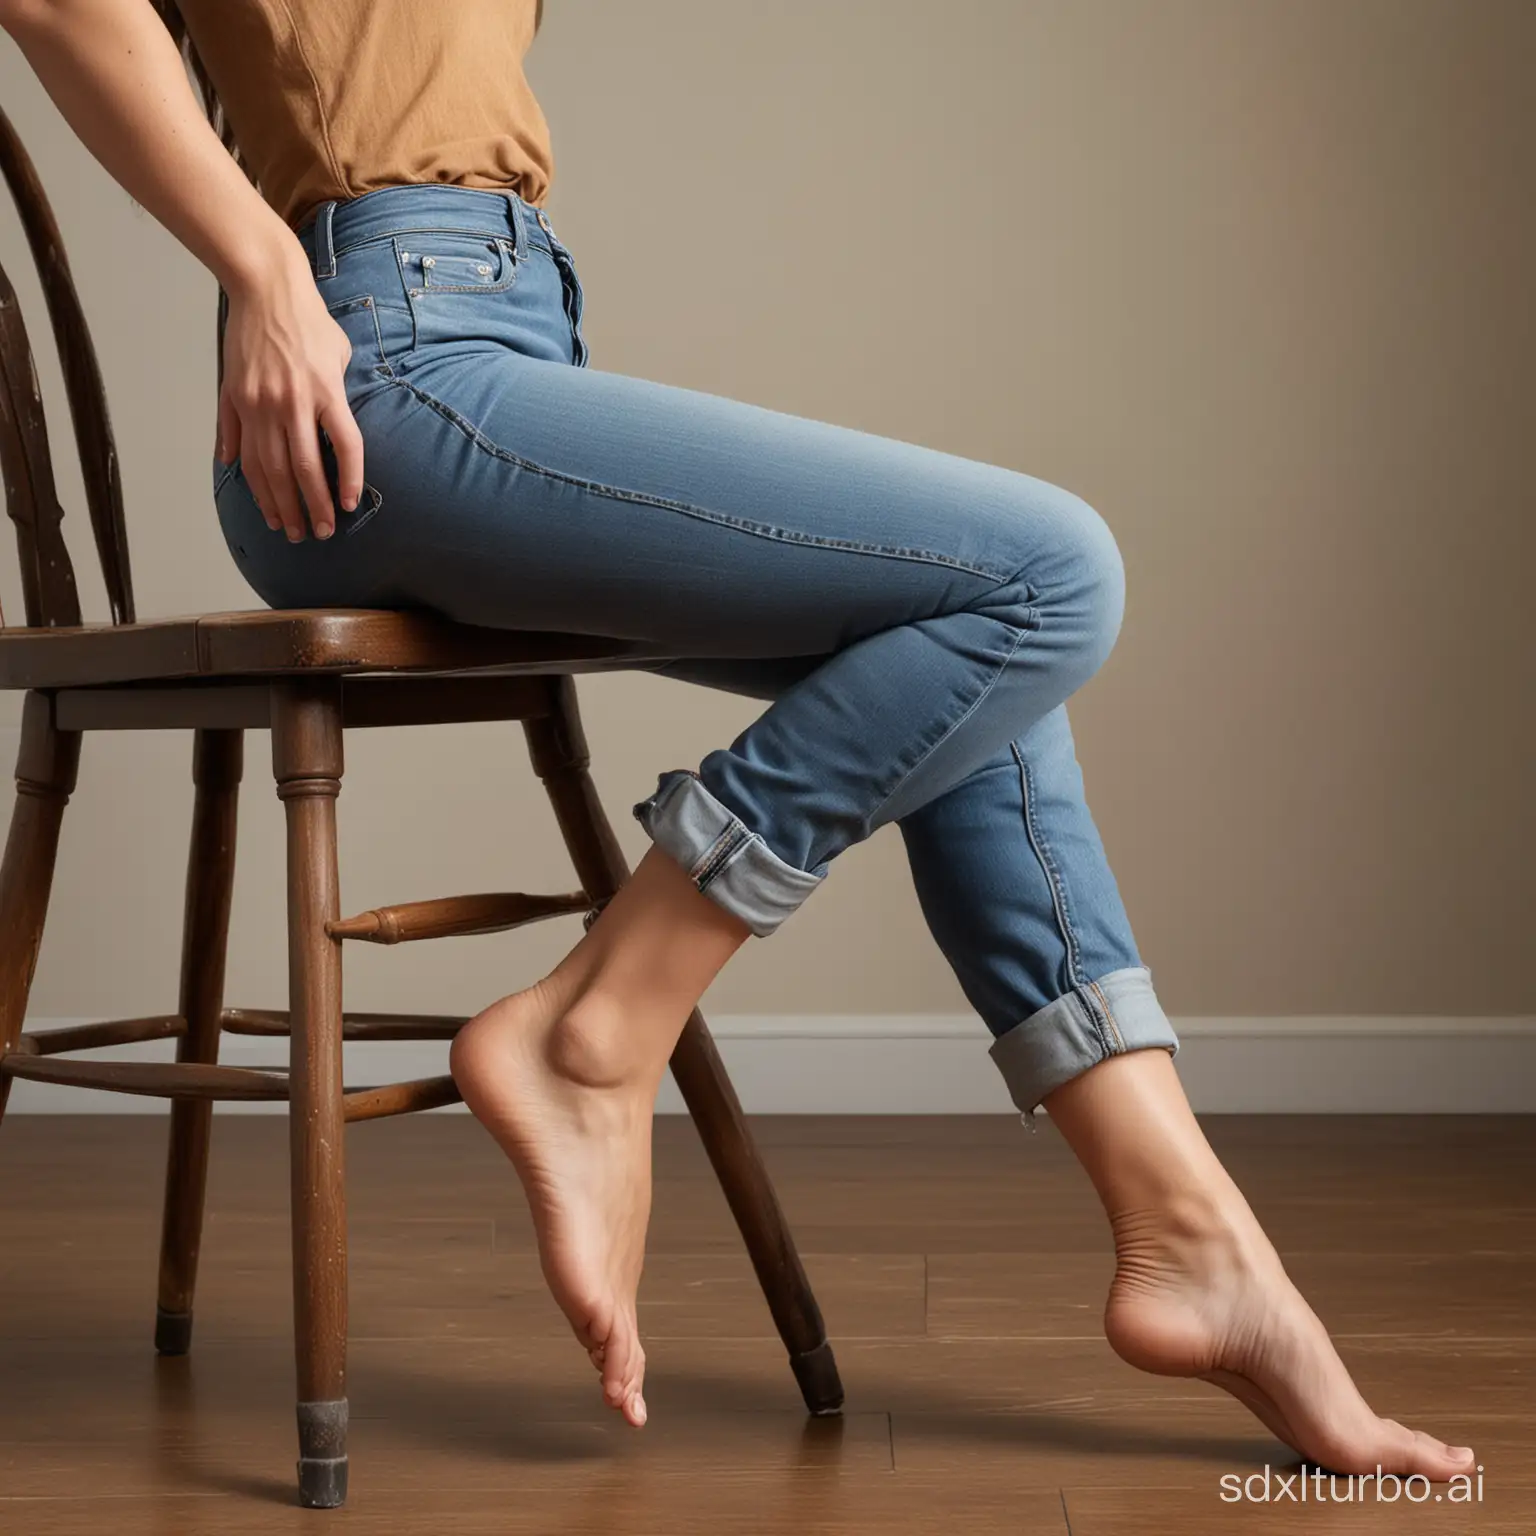 A realistic scene seen from the side of a brunette woman sitting on a chair with her leg stretched out. Her foot is resting on a stool. Her foot as wrinkly arches. She is wearing cowboy pants. On her left leg, the pants are cuffed up til the woman's knee.